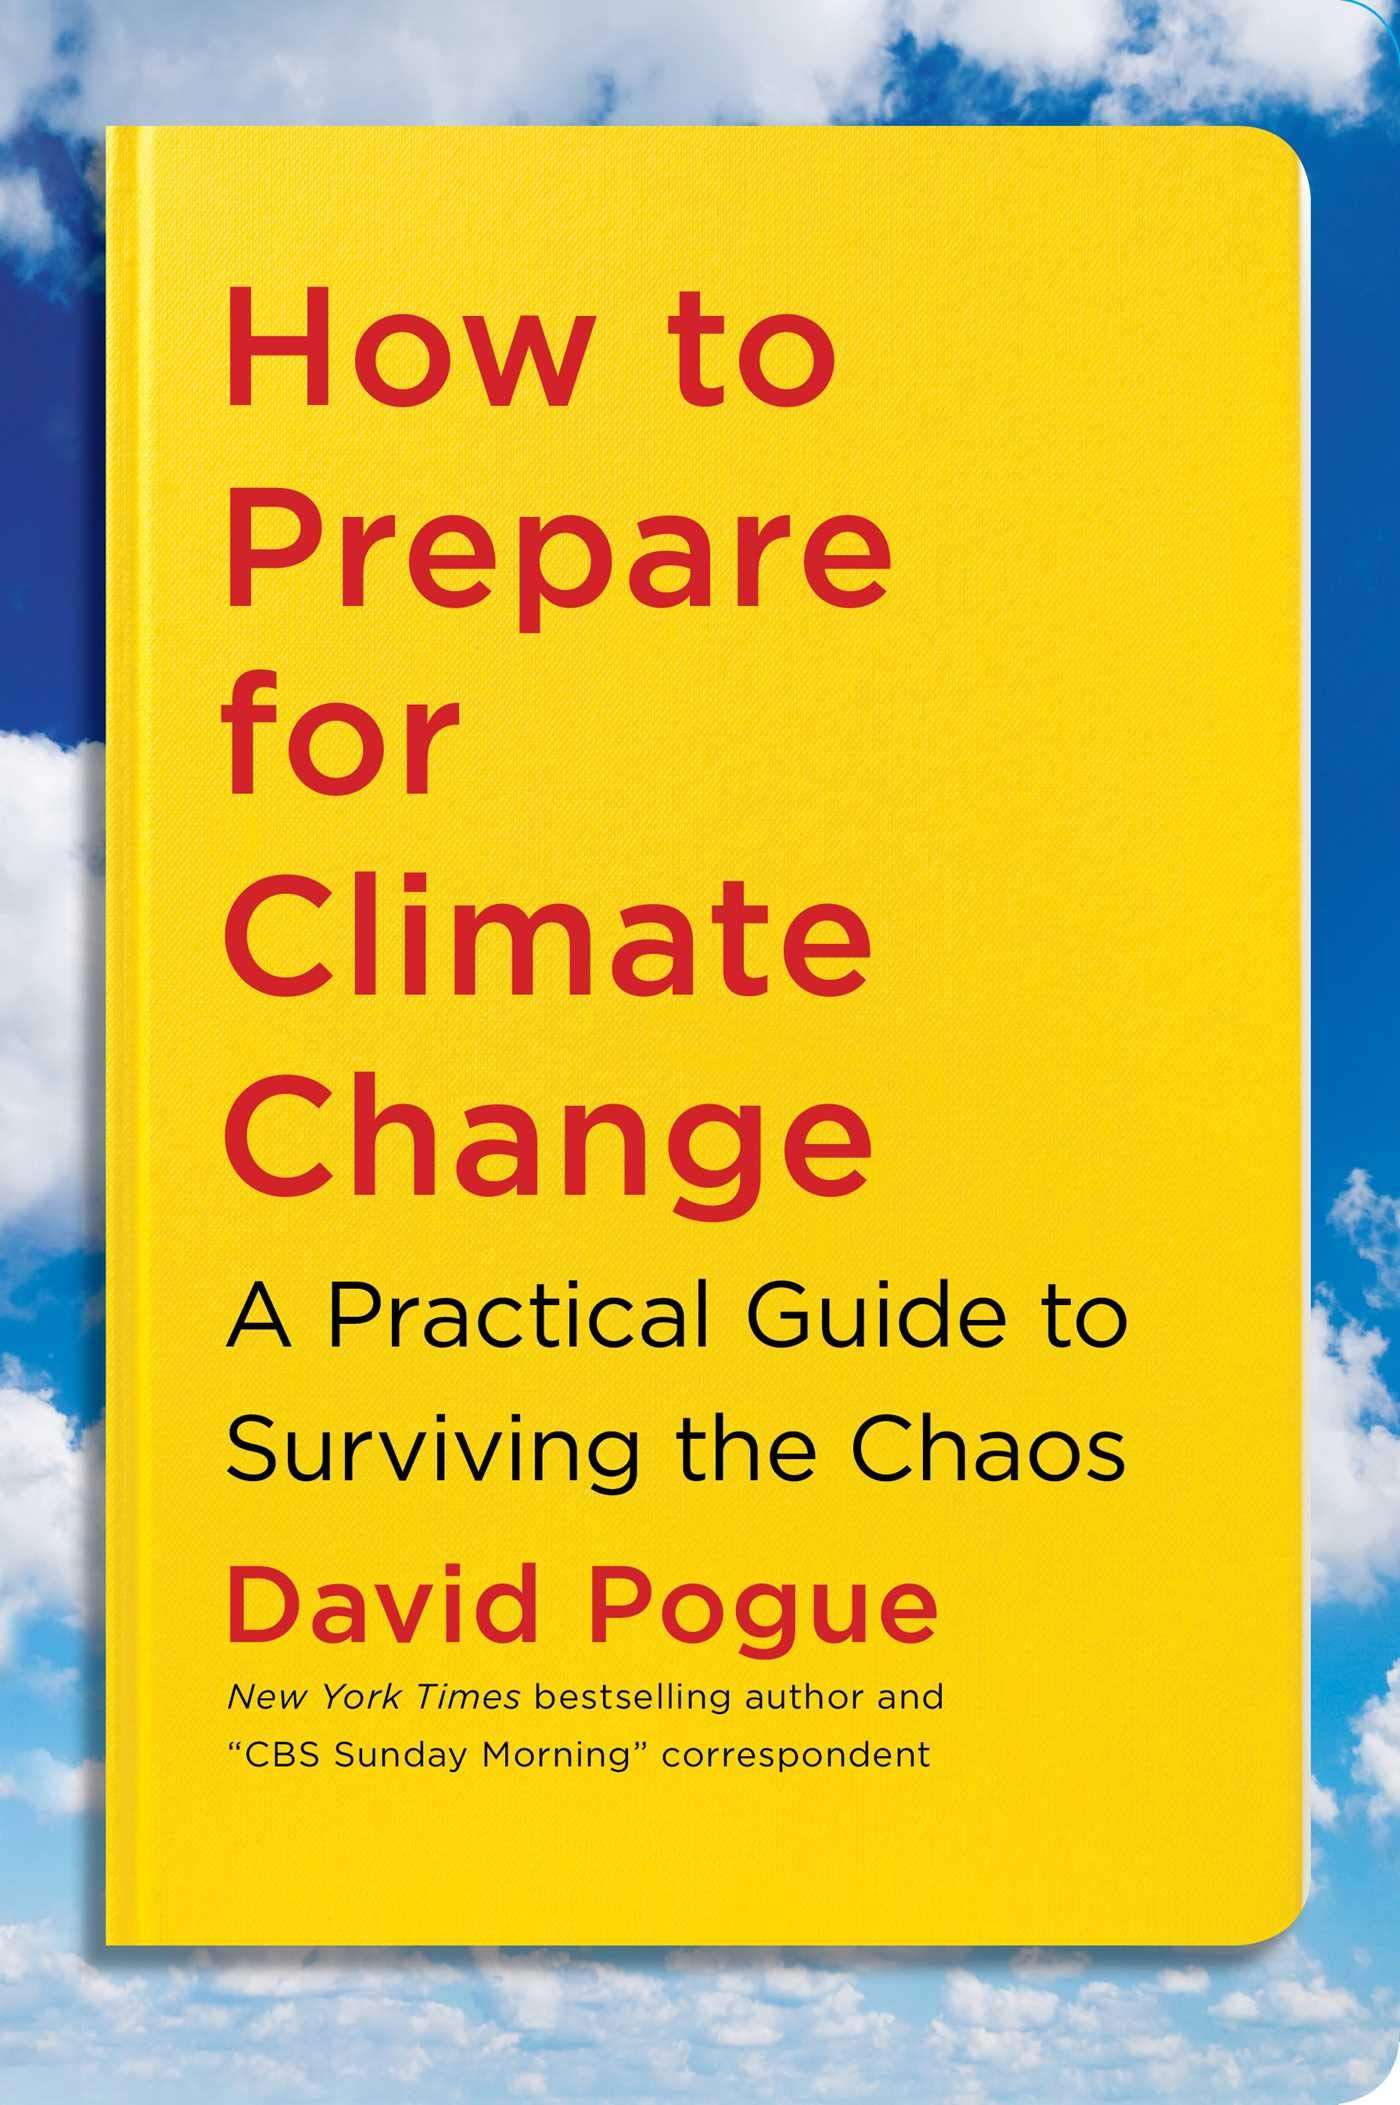 Book cover image for "How to Prepare for Climate Change" by David Pogue